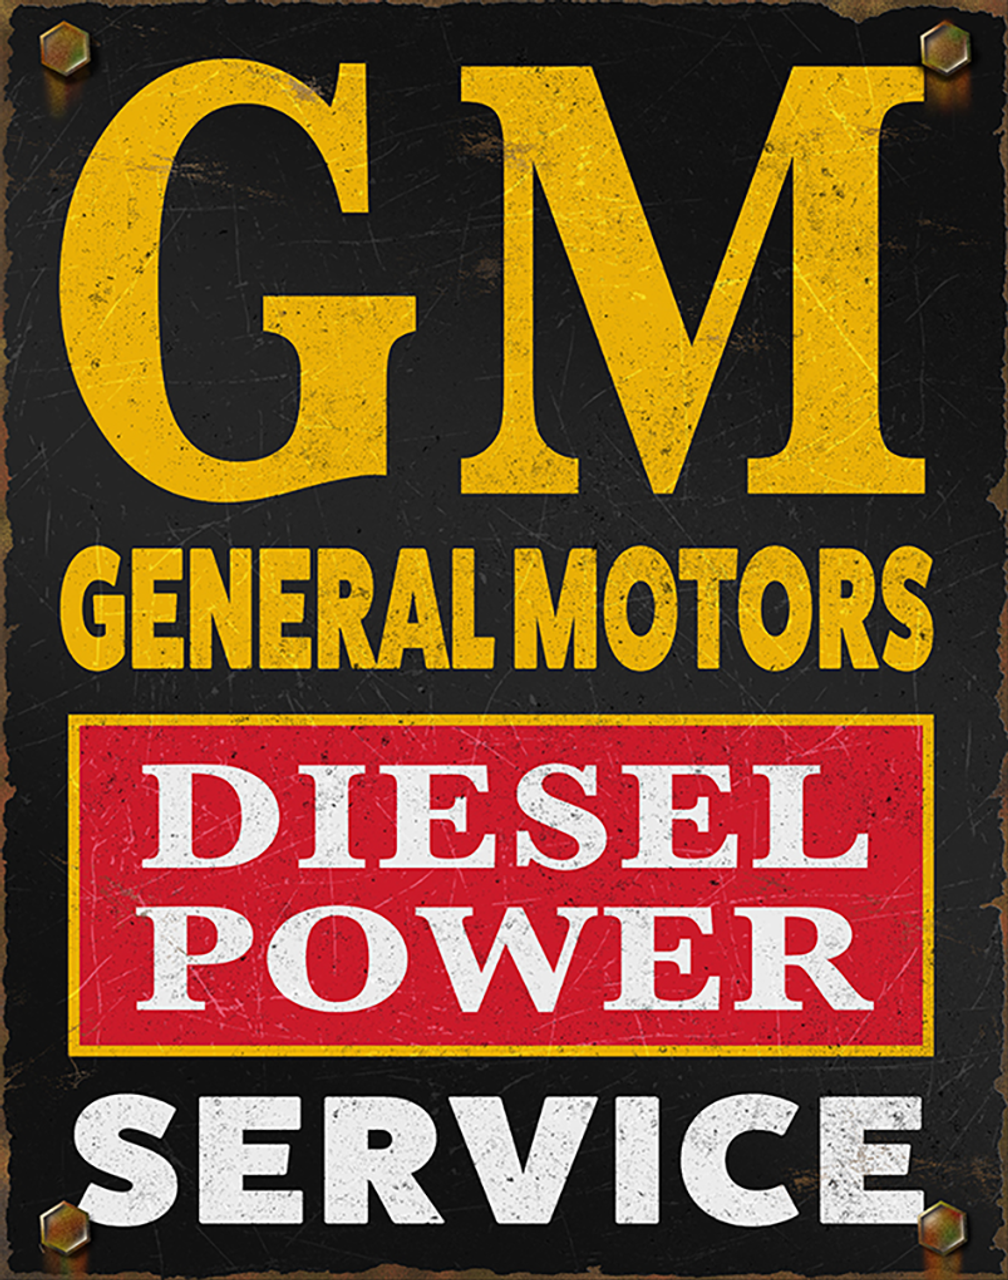 General Motors GM Brand: GM
Sign Material: Tin sign
Sign Size: 16in x 12.5in - 40.64cm x 31.75cm 
Print Layout: Vertical/Portrait
Made In: U.S.A